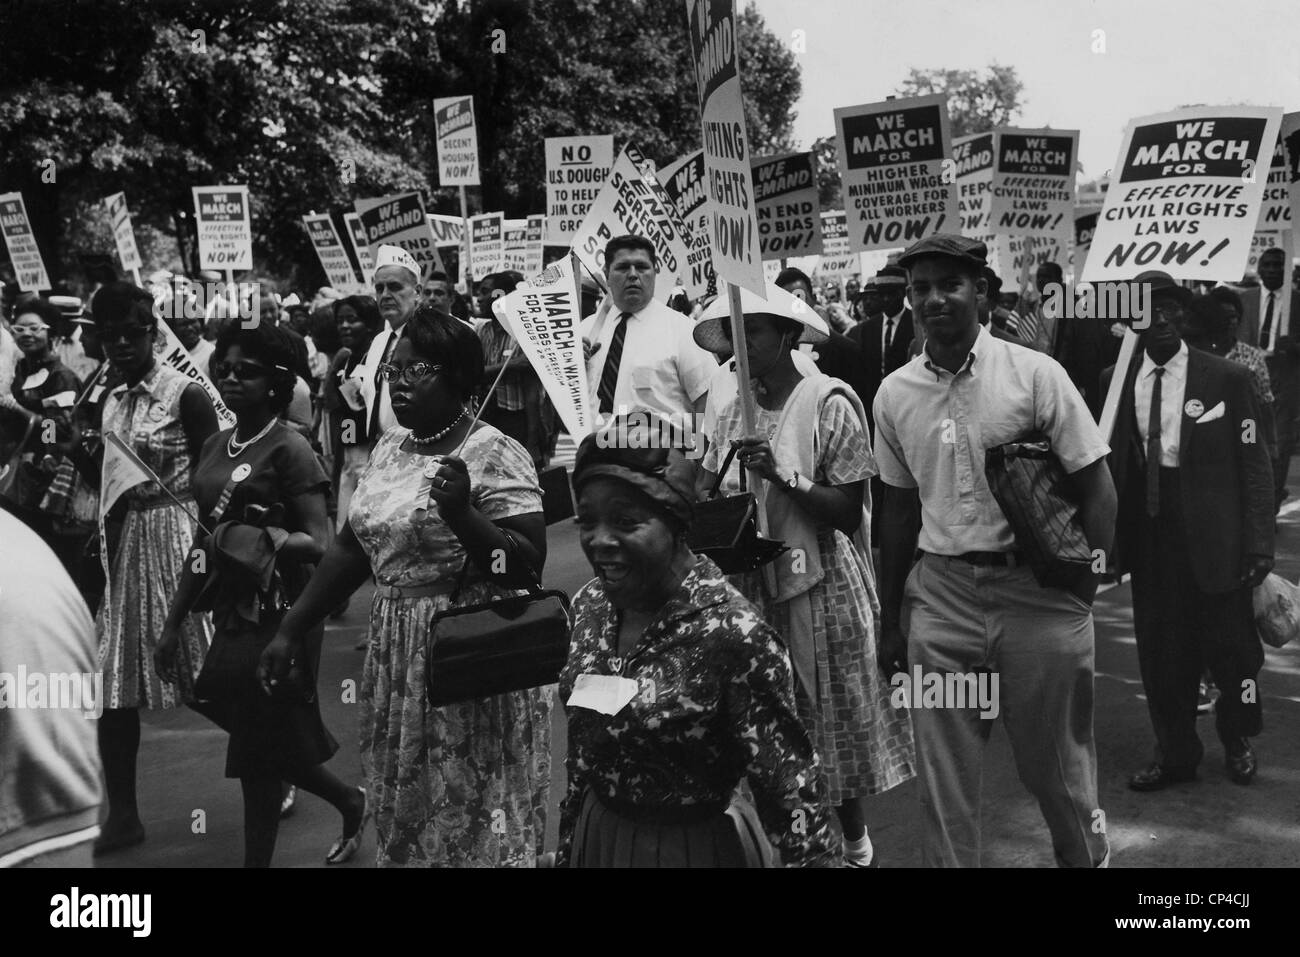 1963 March on Washington. Marchers carrying signs in the streets of Washington, D.C. Signs addressed civil rights, segregation, Stock Photo